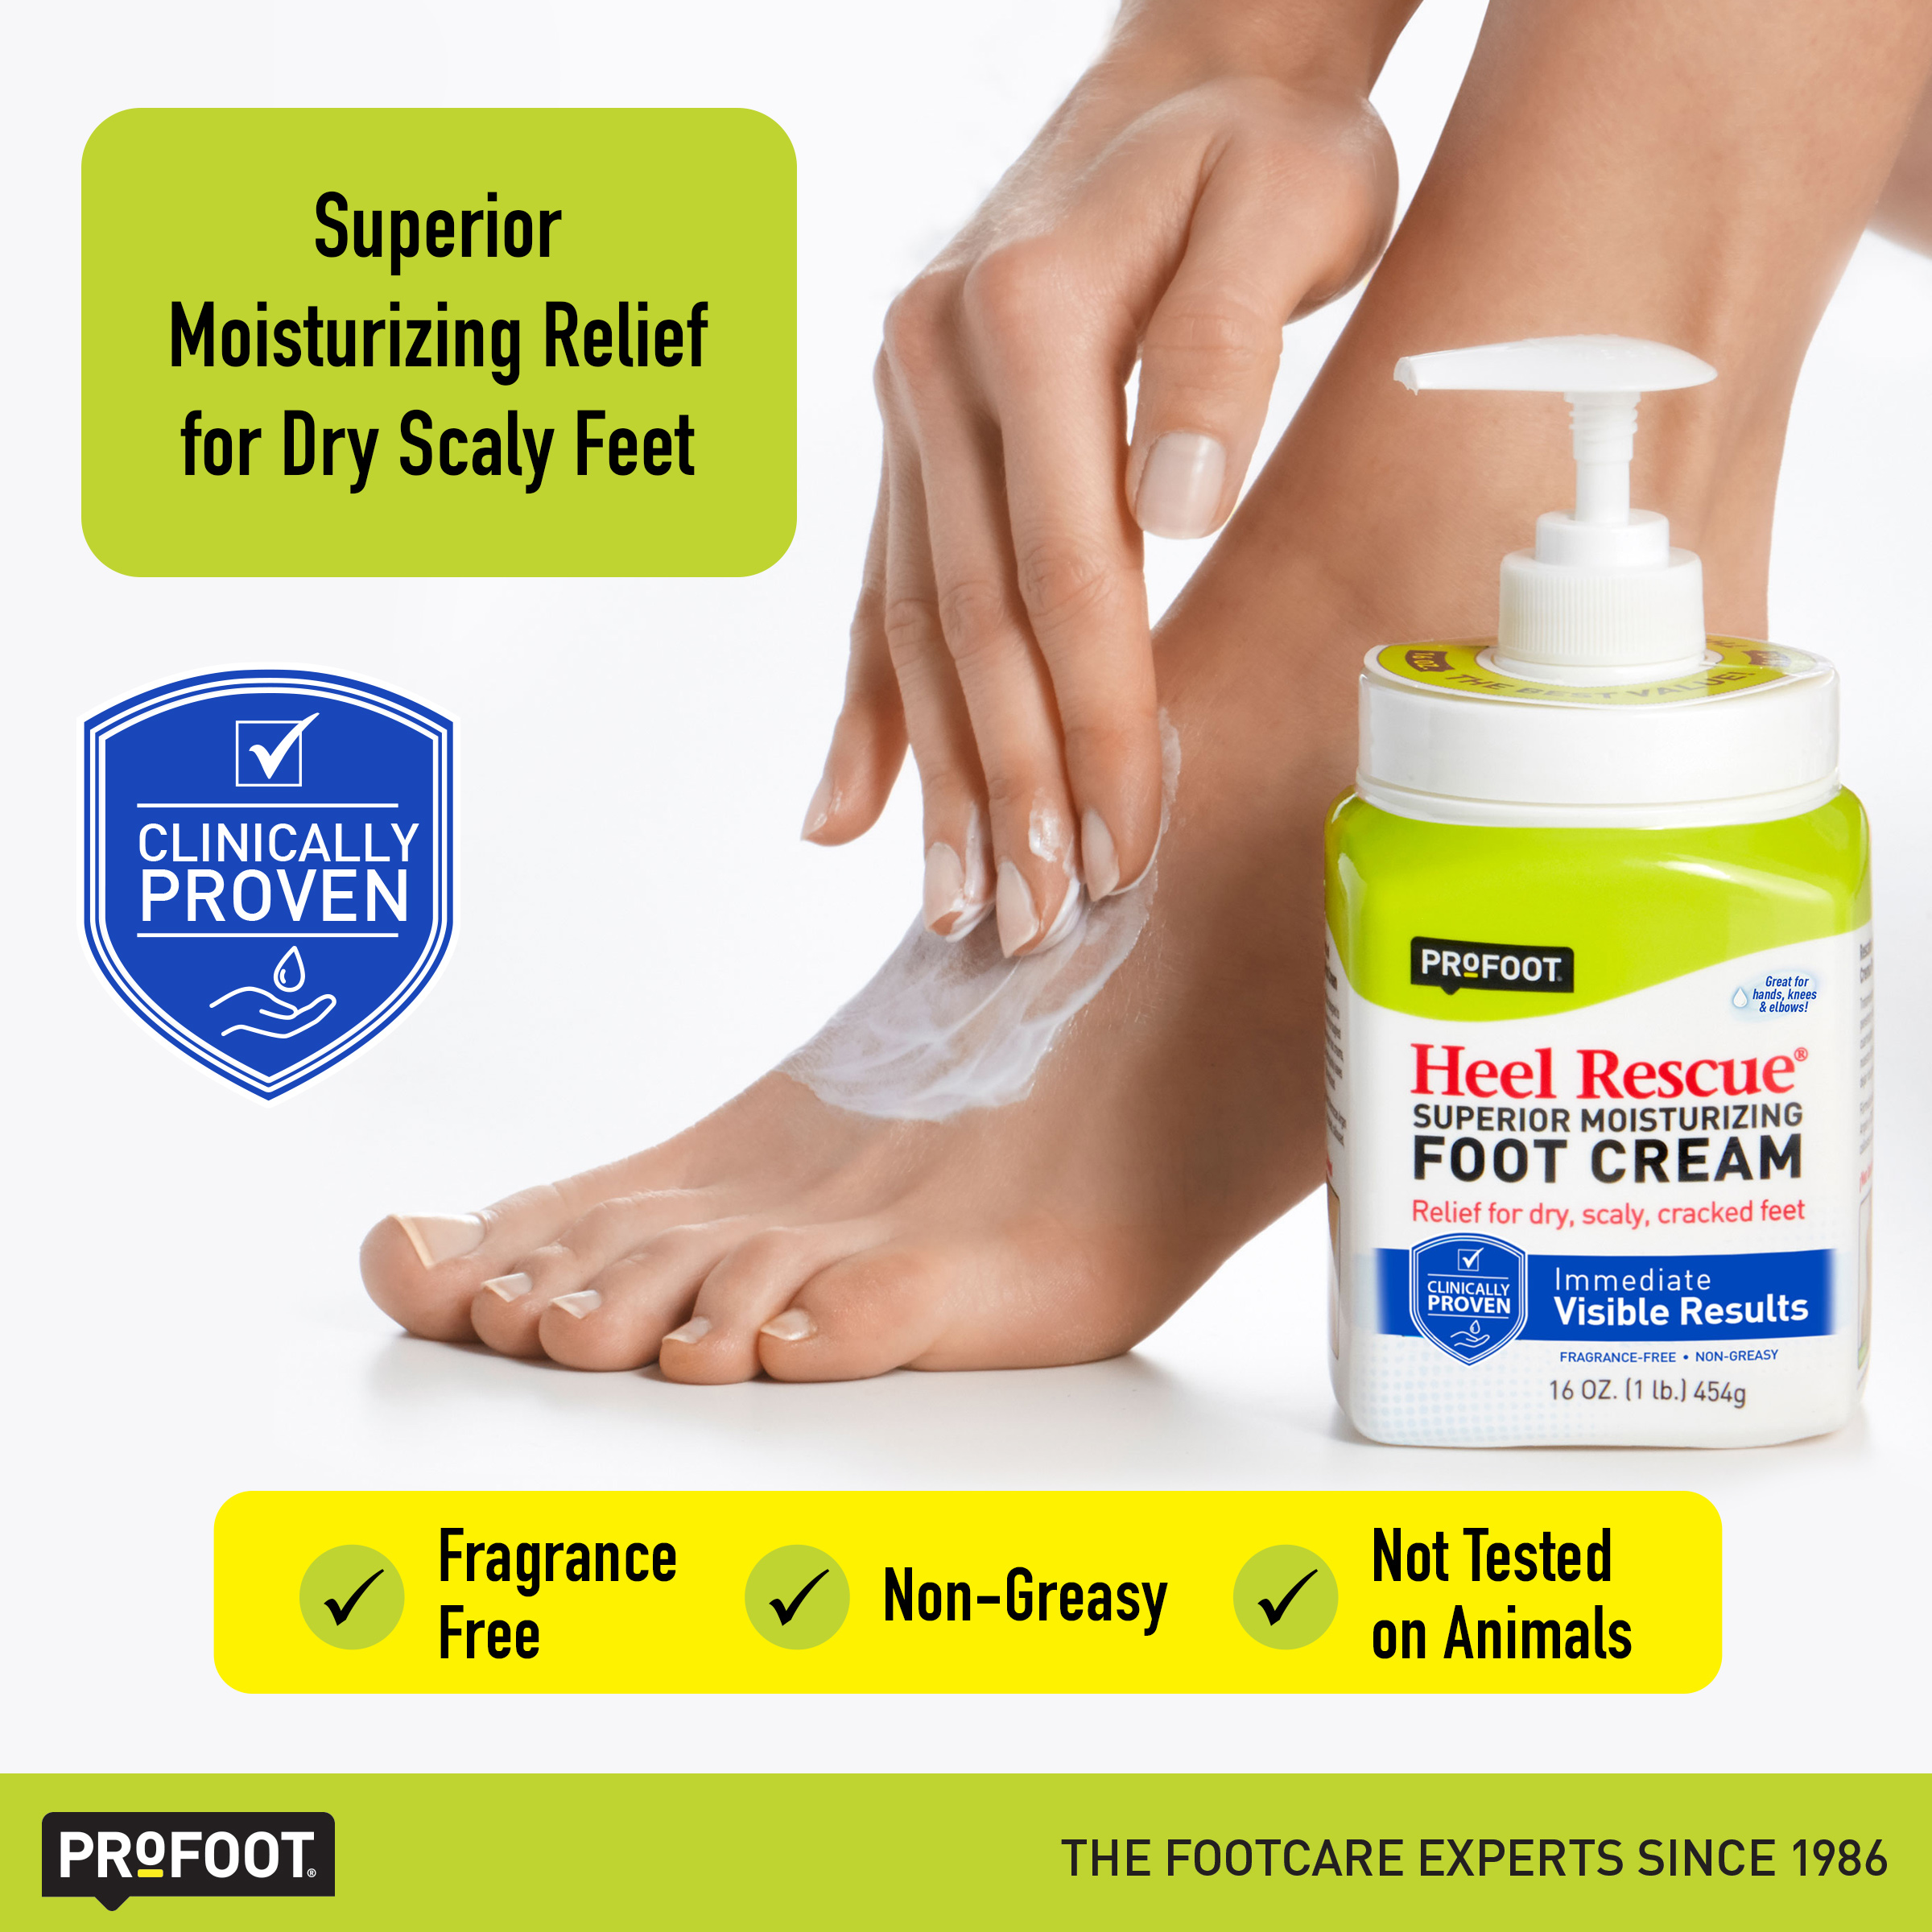 PROFOOT Heel Rescue Foot Cream for Cracked, Calloused, or Chapped Skin, 16 oz - image 3 of 8